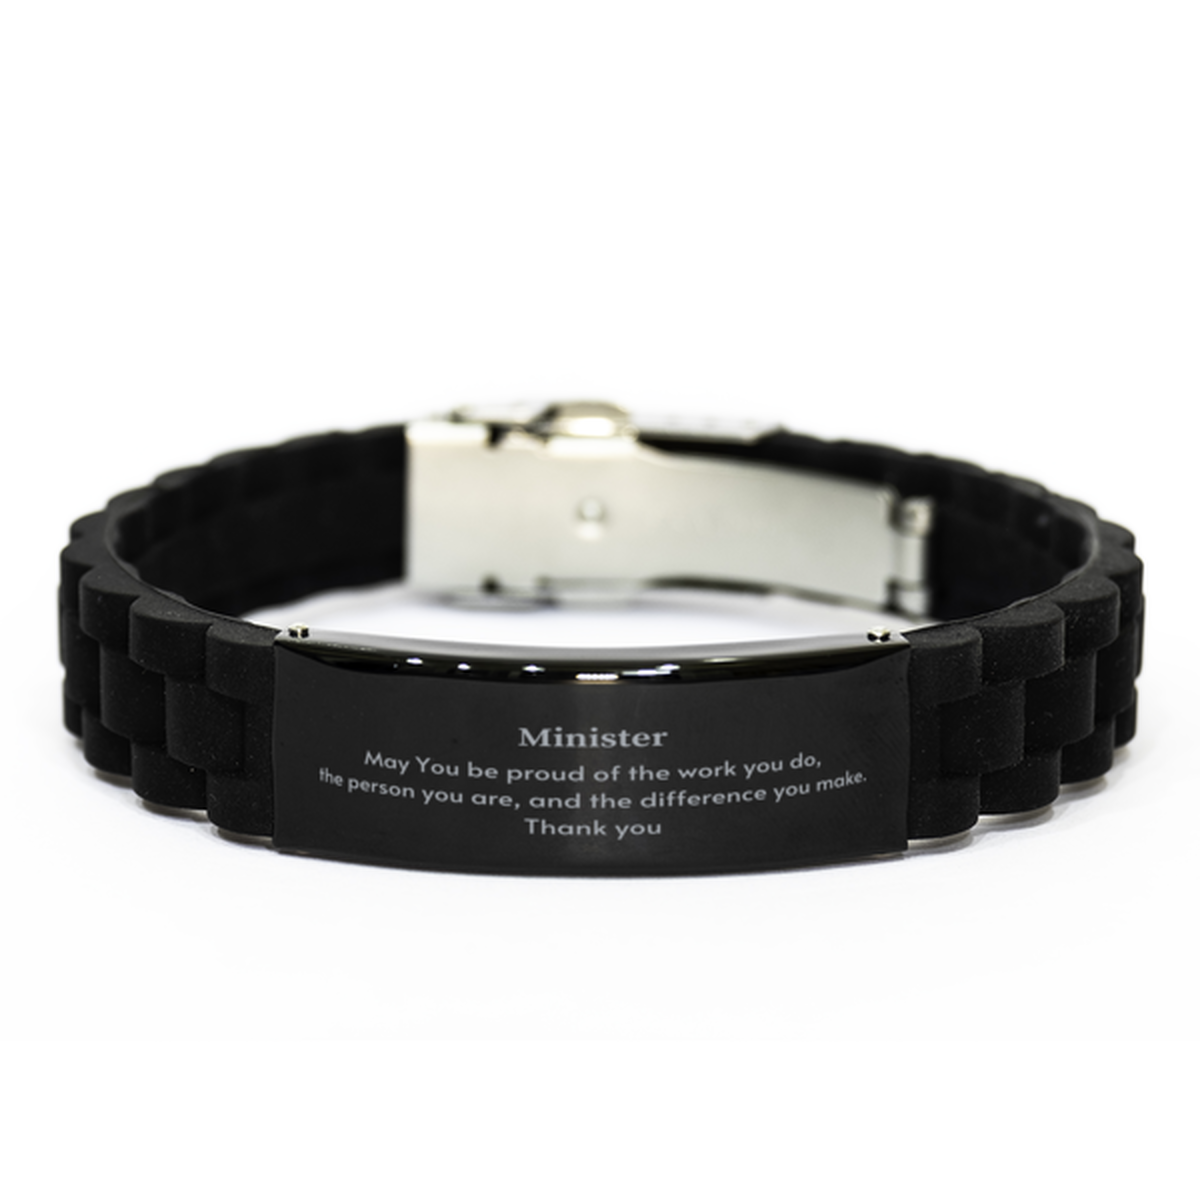 Heartwarming Black Glidelock Clasp Bracelet Retirement Coworkers Gifts for Minister, Minister May You be proud of the work you do, the person you are Gifts for Boss Men Women Friends